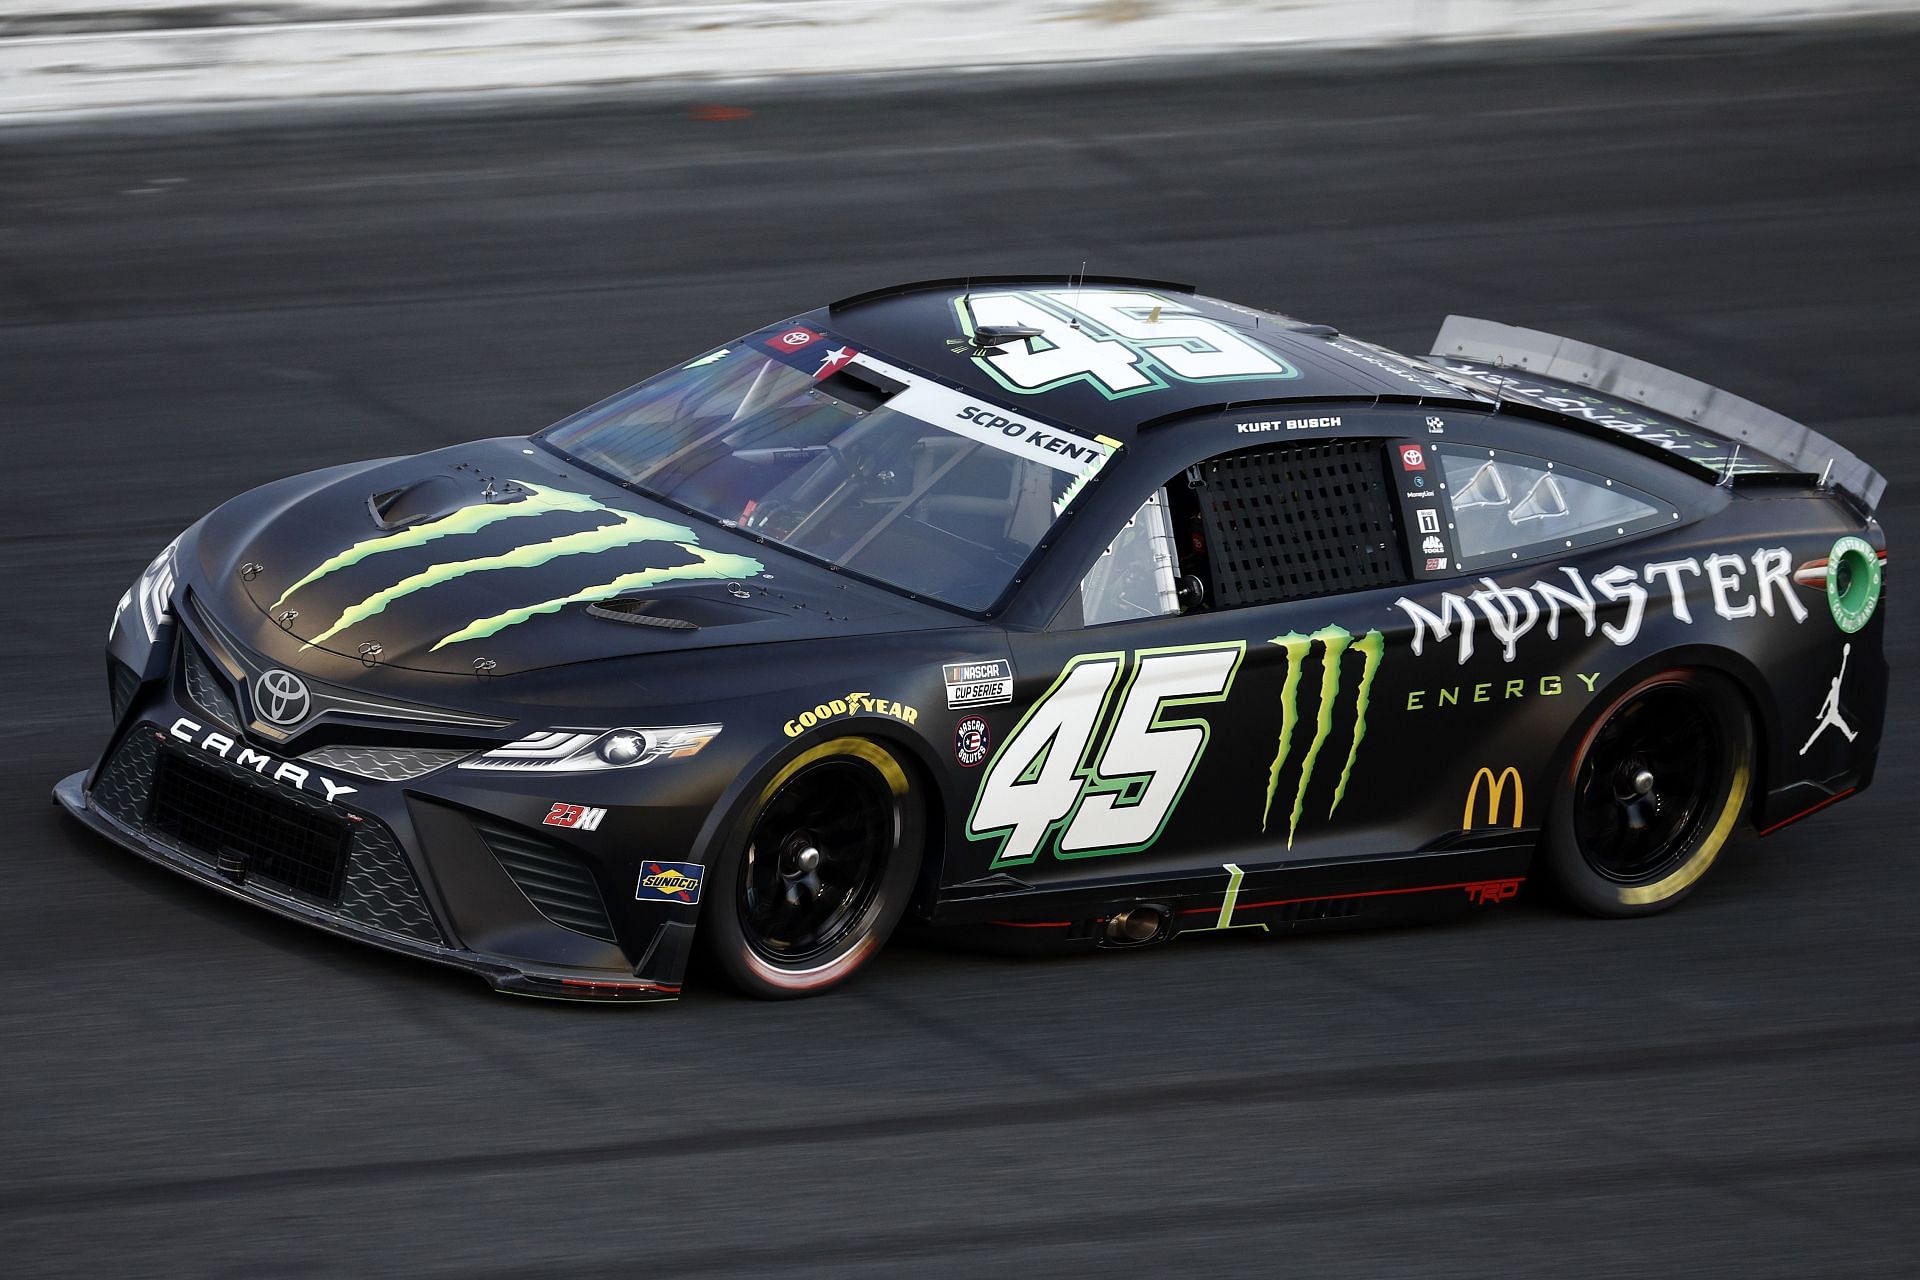 The #45 Monster Energy Toyota during qualifying for the NASCAR Cup Series Coca-Cola 600 at Charlotte Motor Speedway